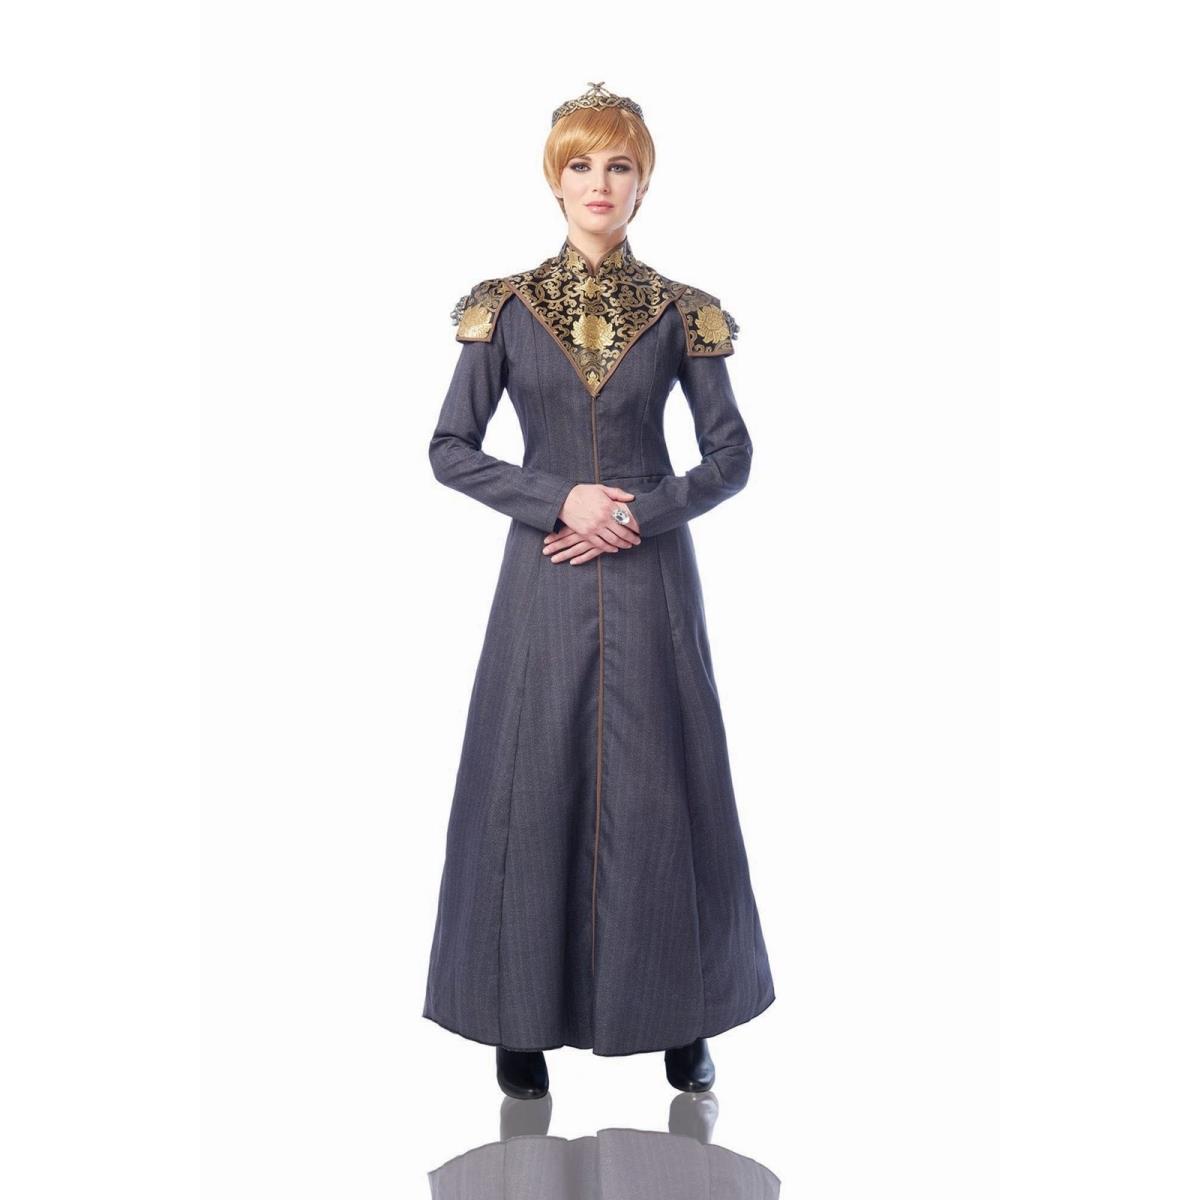 403685 Womens Queen Of Kingdoms Costume - Large